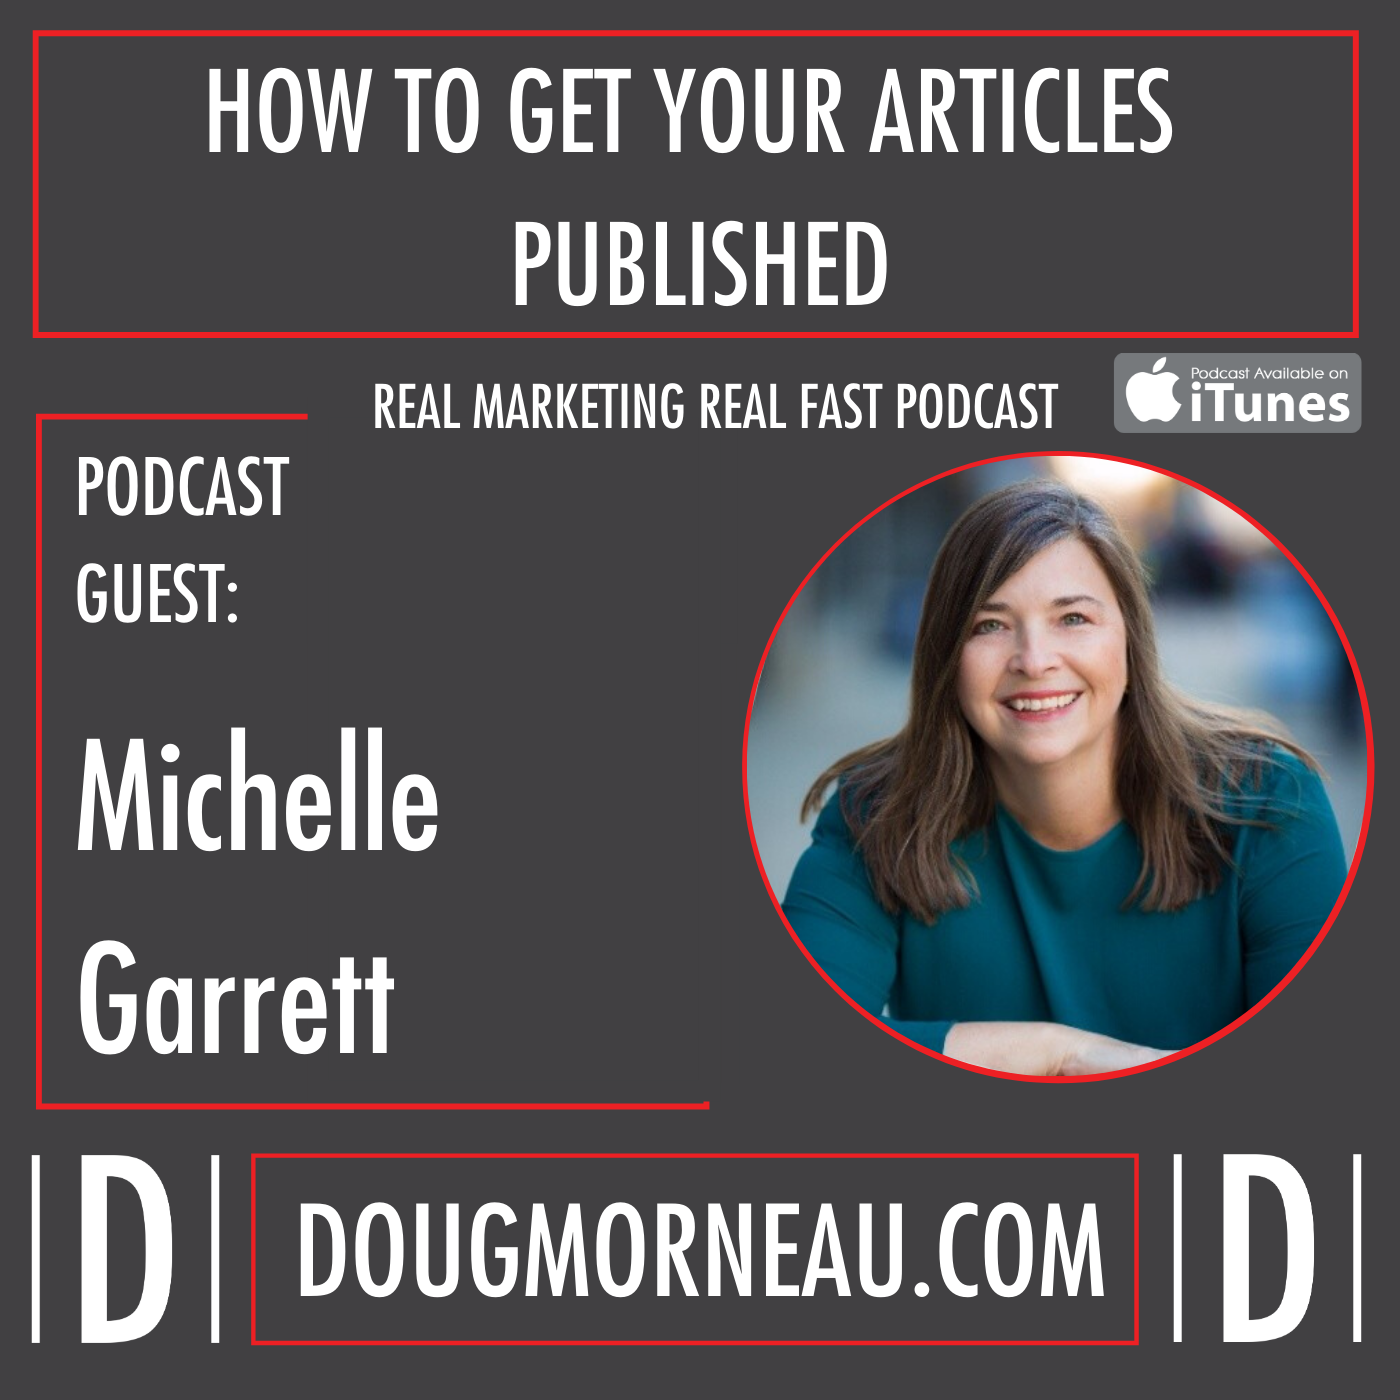 HOW TO GET YOUR ARTICLES PUBLISHED MICHELLE GARRETT- DOUG MORNEAU - REAL MARKETING REAL FAST PODCAST